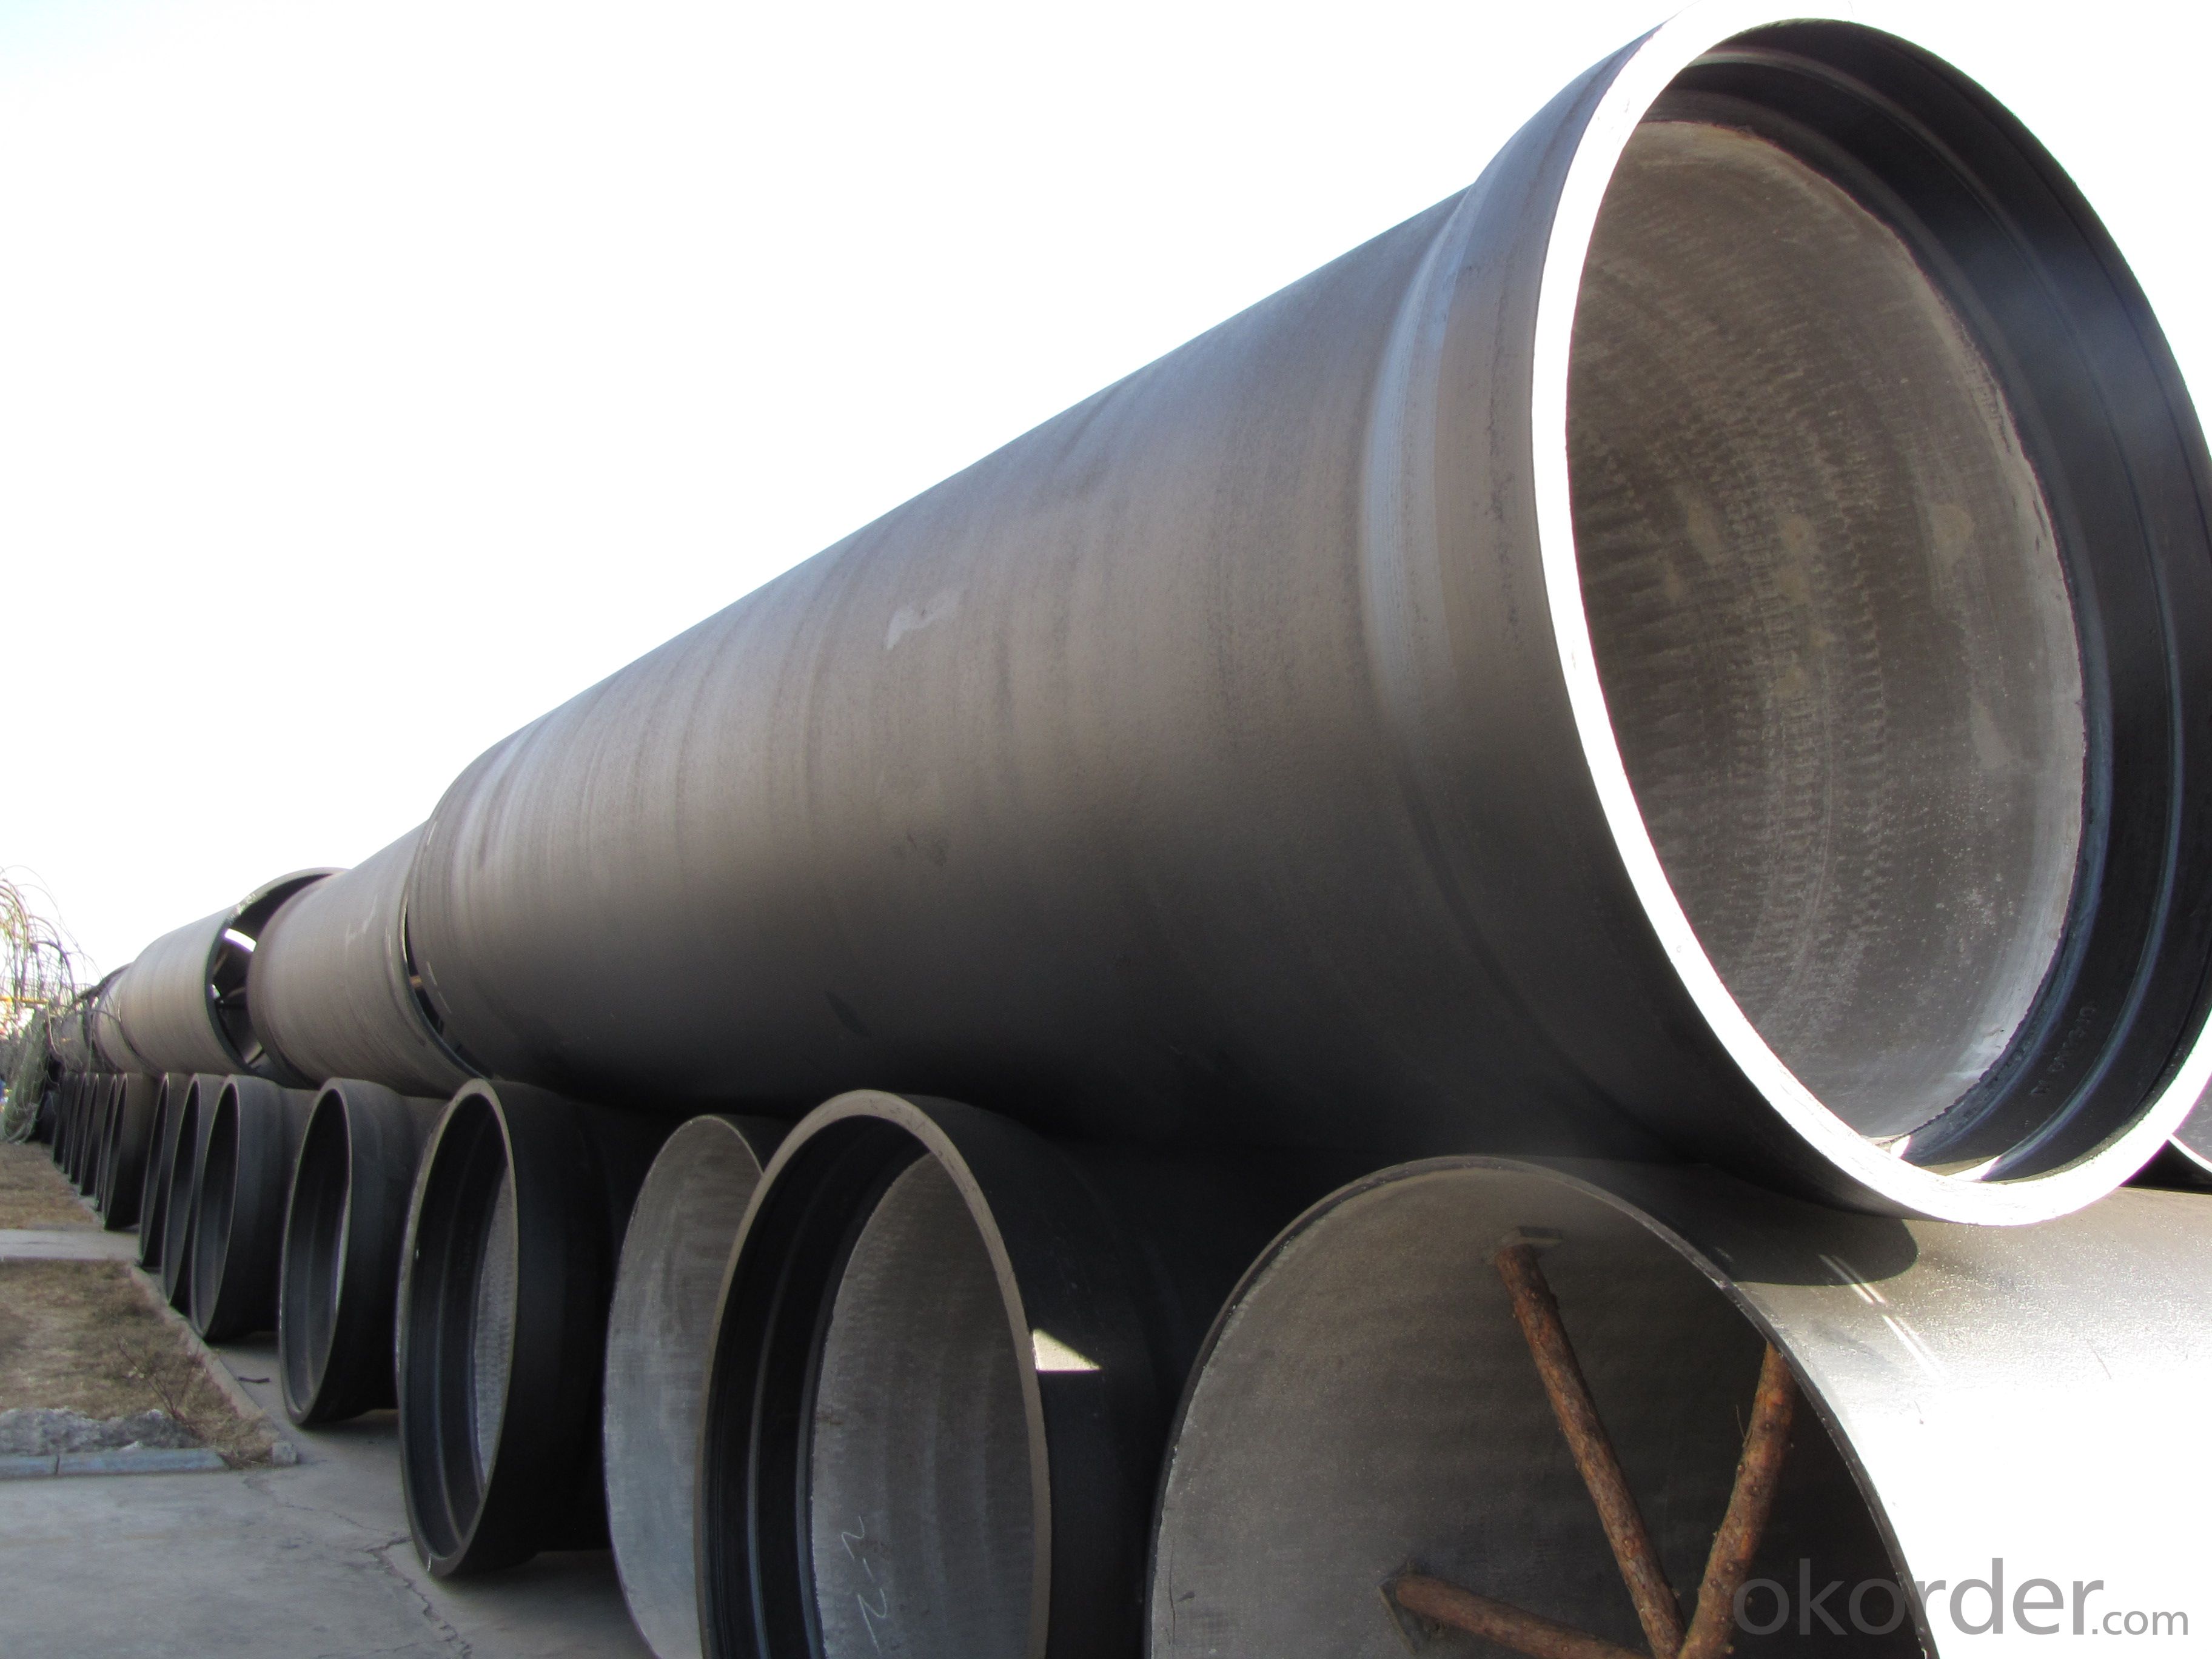 Ductile Iron Pipe DN1600 real-time quotes, last-sale prices -Okorder.com